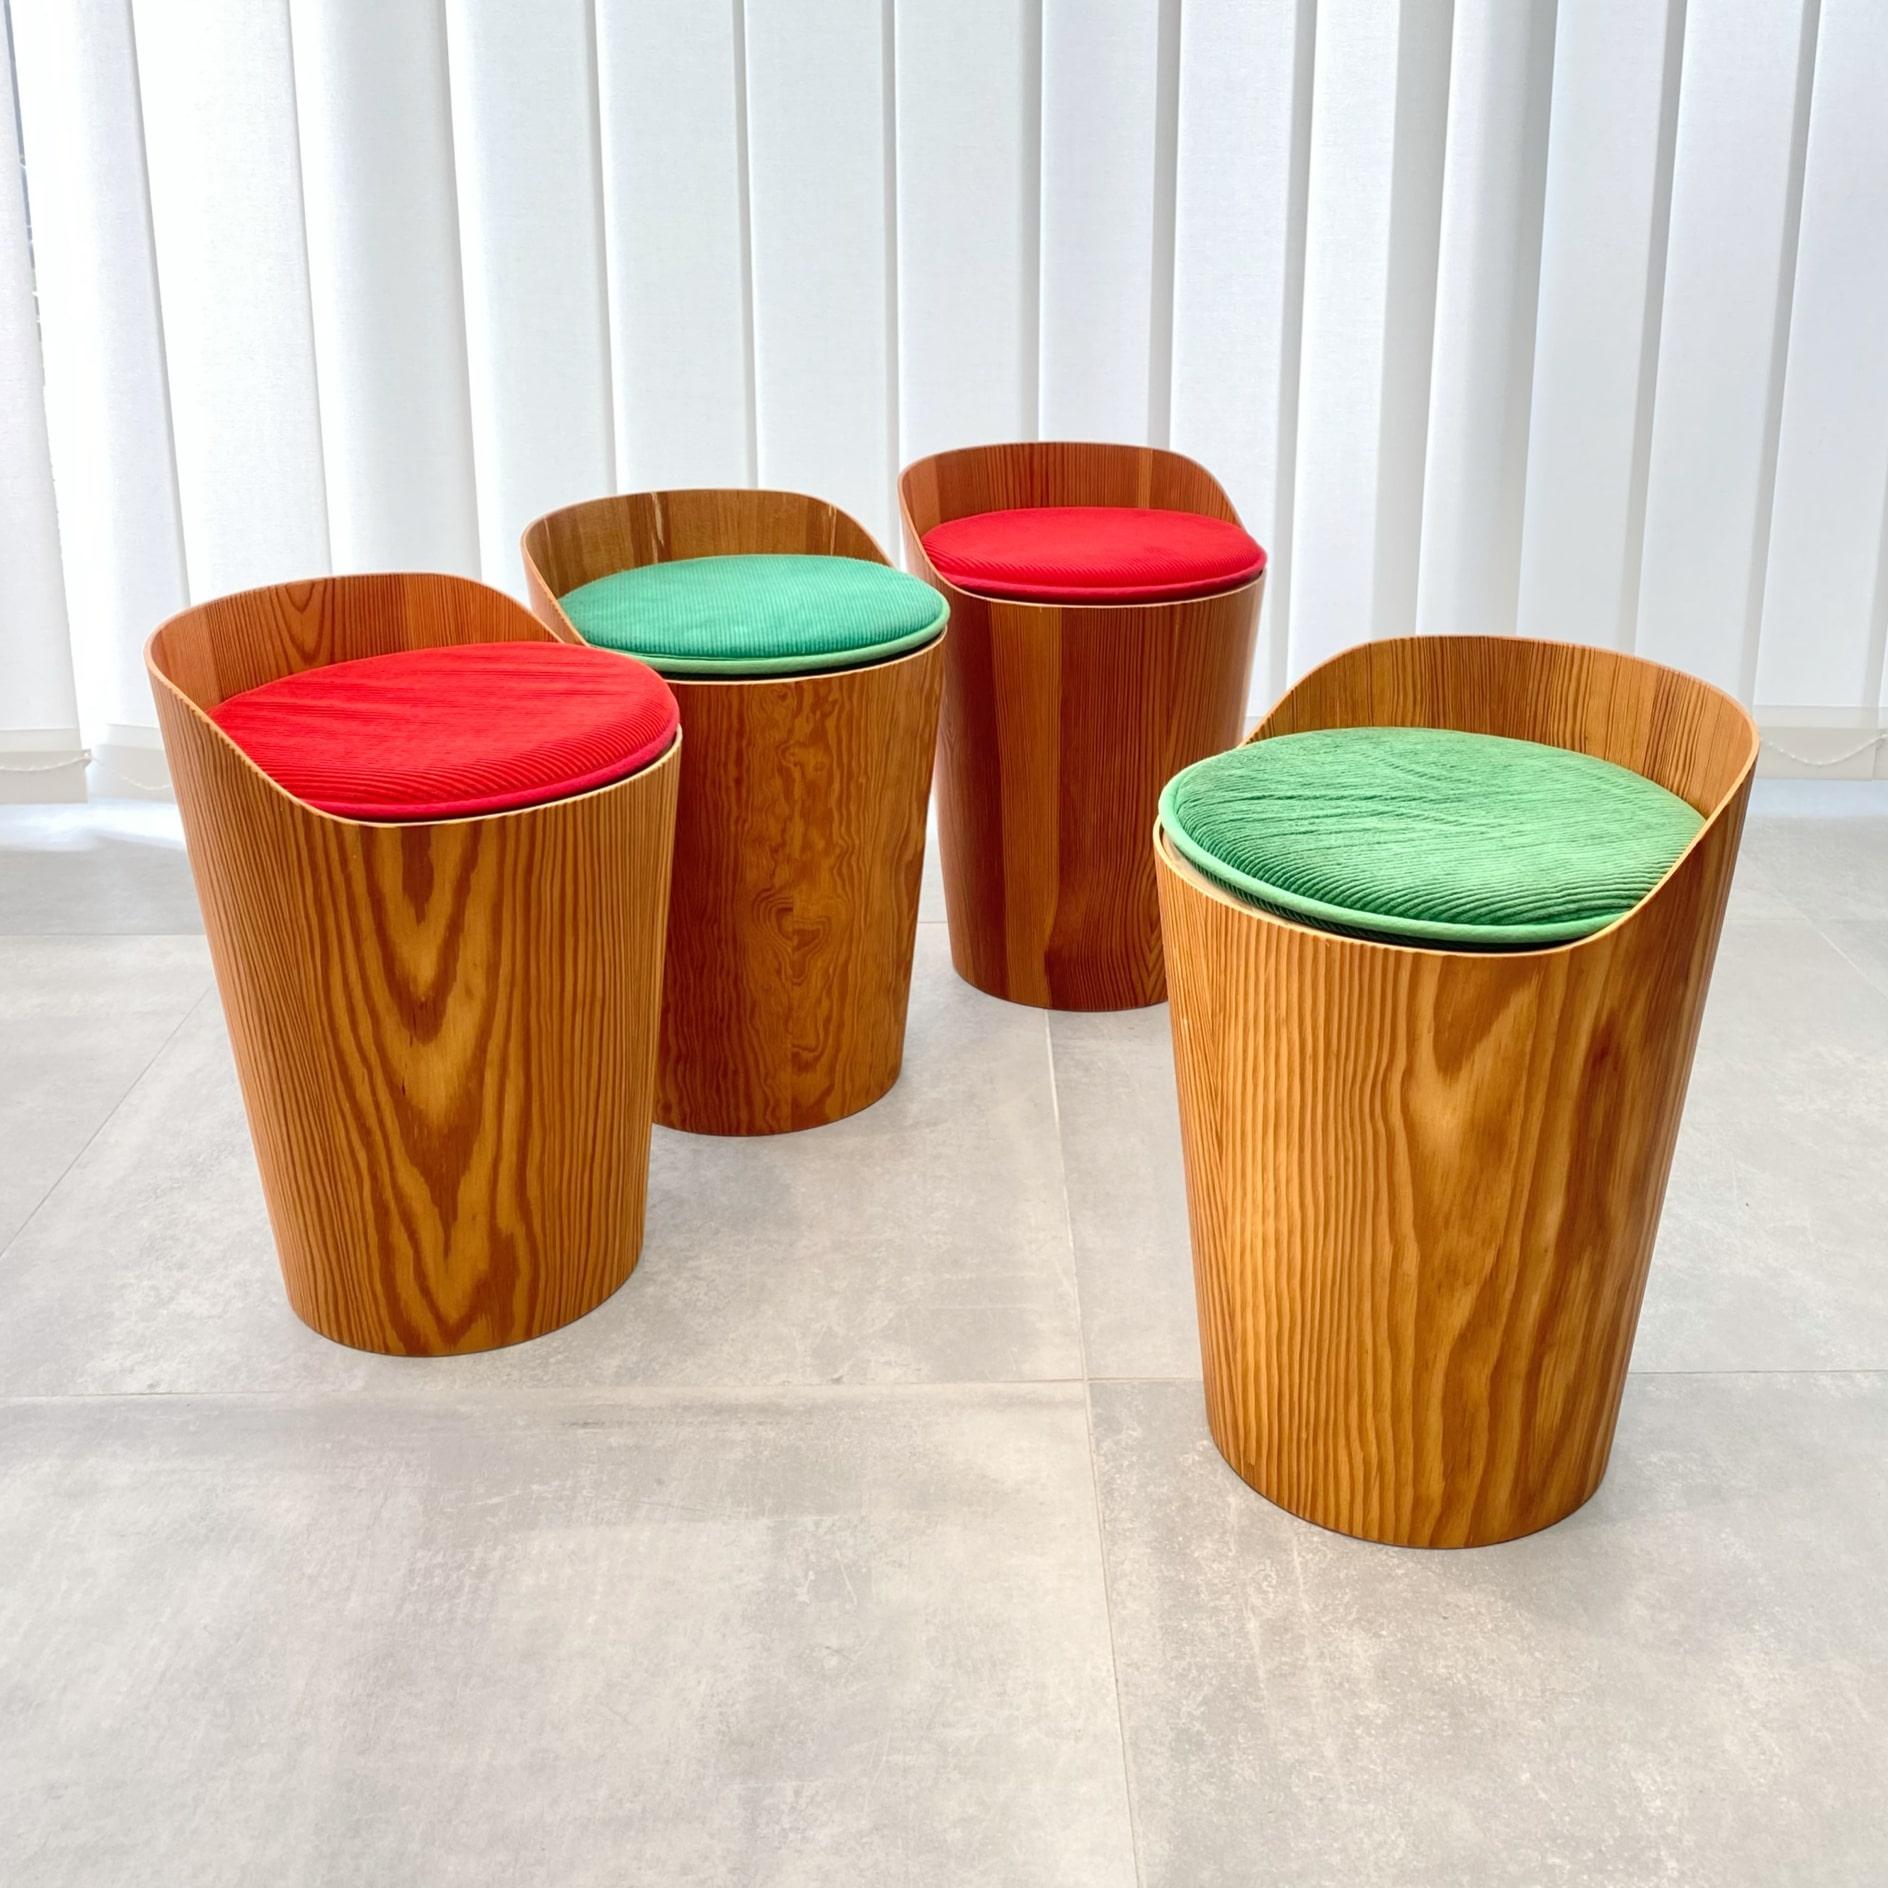 A set of four small Swedish modernist stools designed by Martin Åberg, produced in the 1960s by the manufacturer Servex. Crafted from molded pine veneer with a cylindrical seat at the top. Each stool has a loose cushion with original corduroy